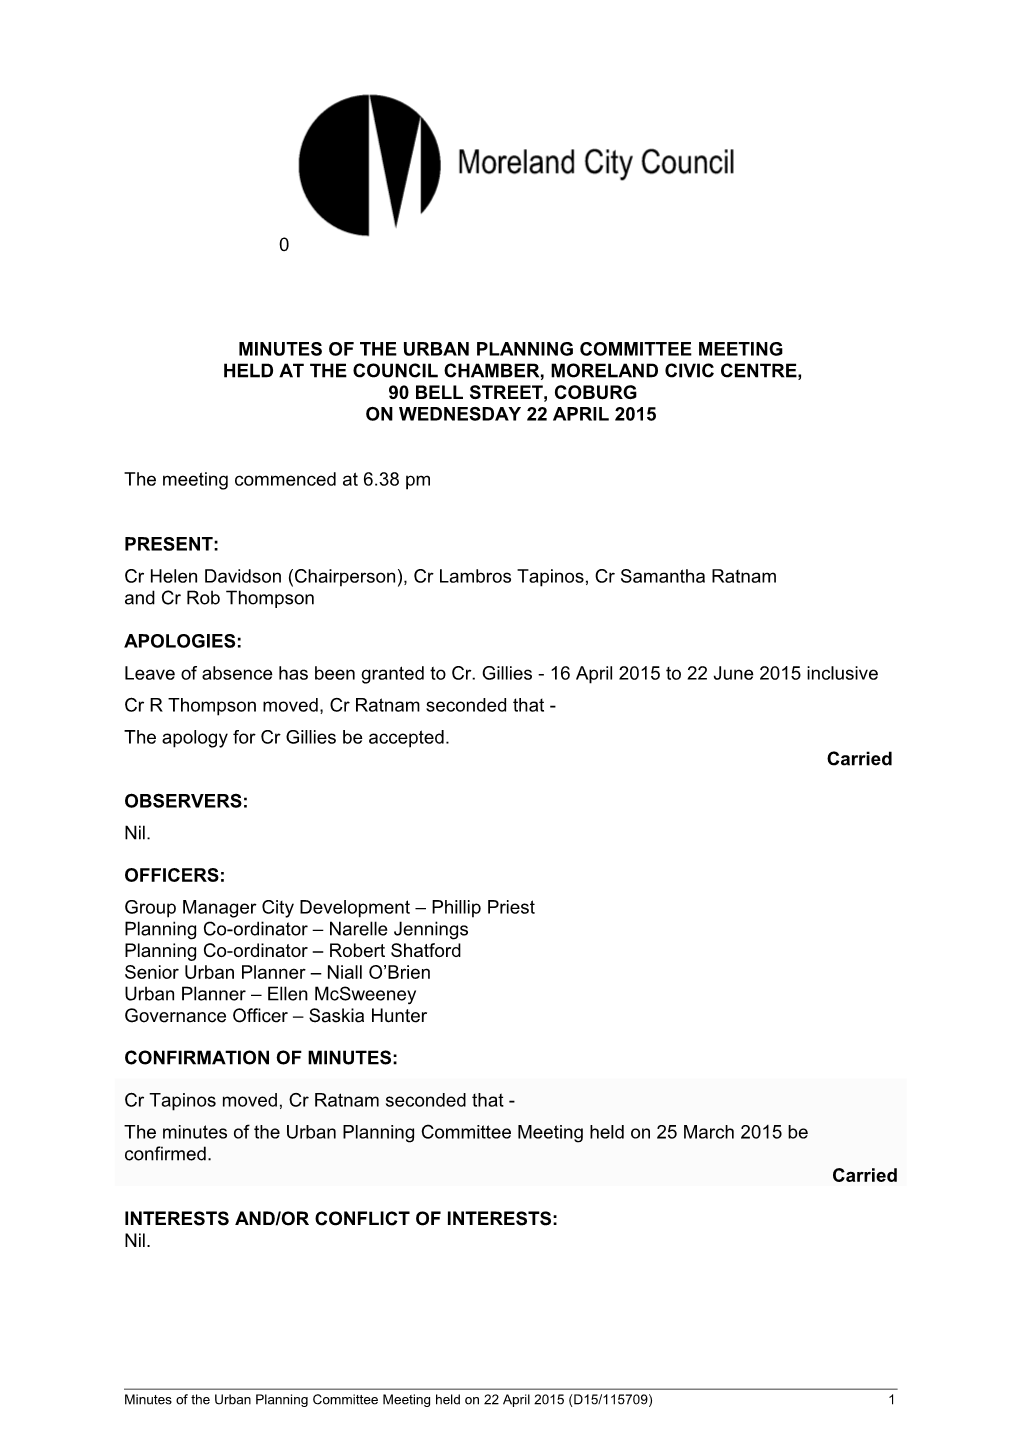 Minutes of Urban Planning Committee Meeting - 22 April 2015